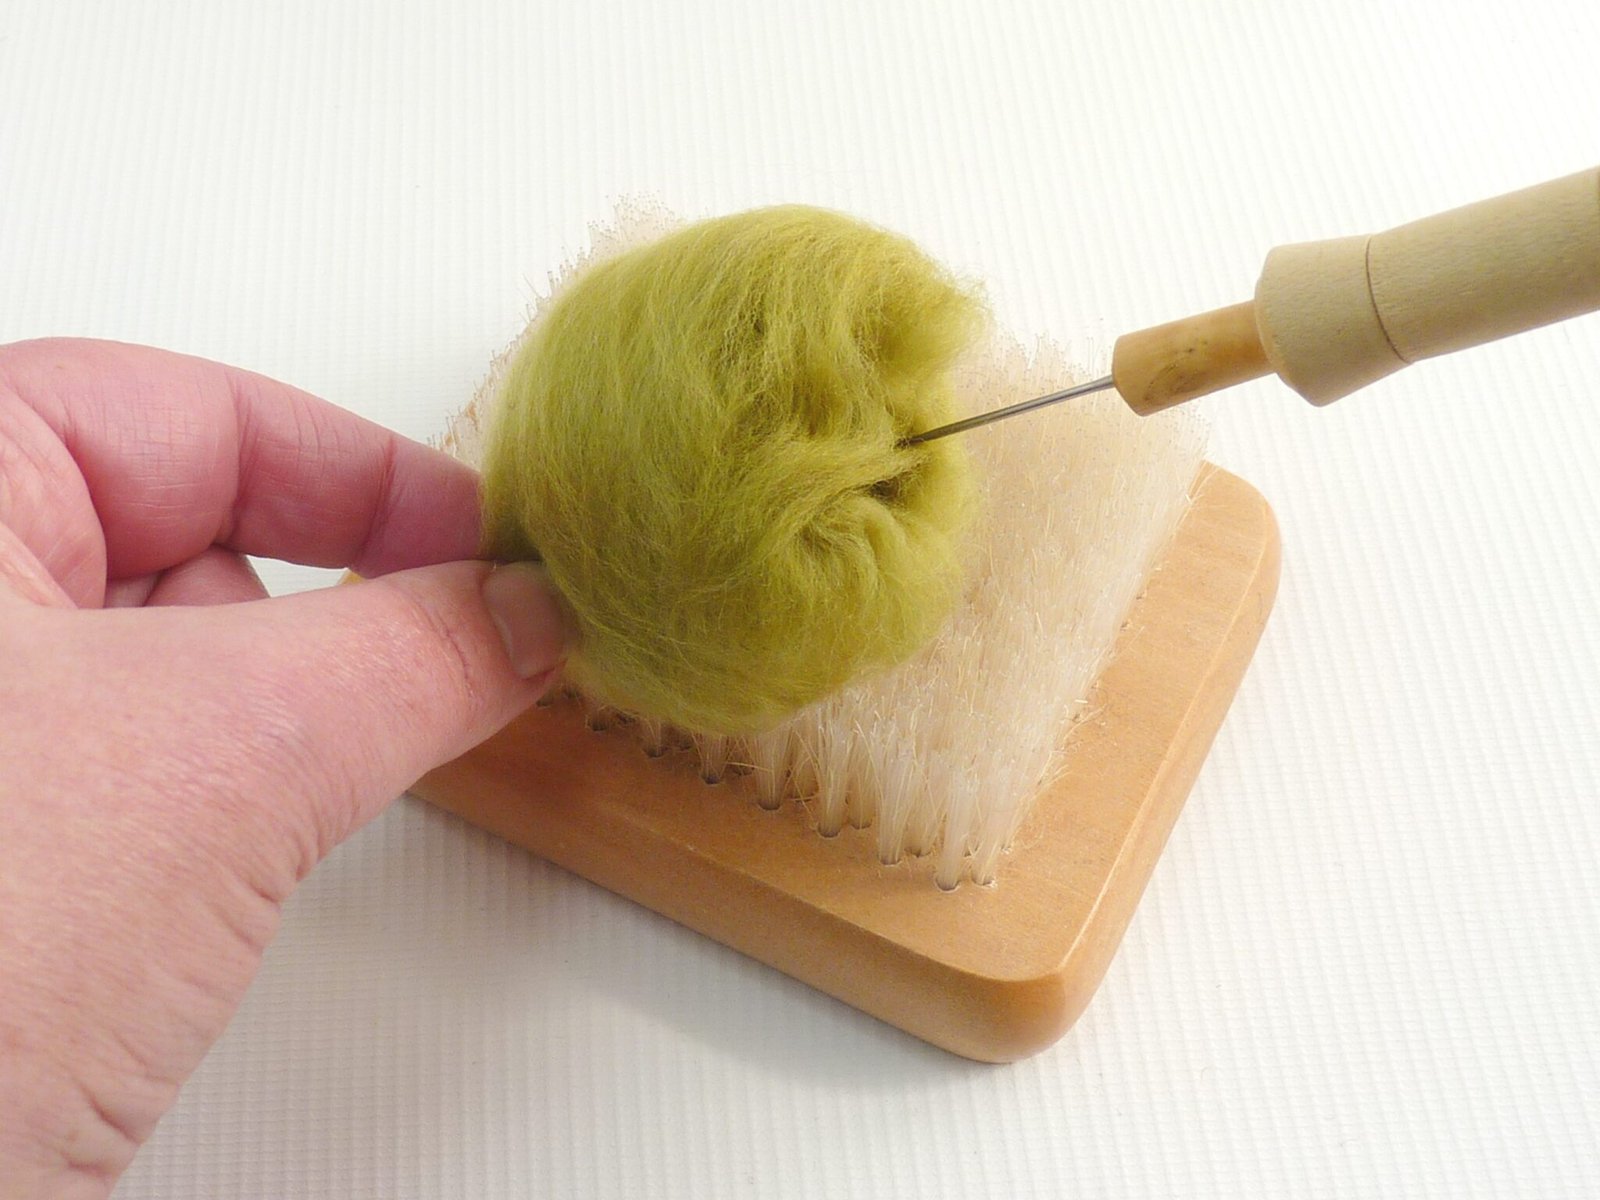 How To Do Needle Felting Step By Step In 2024 - BCG